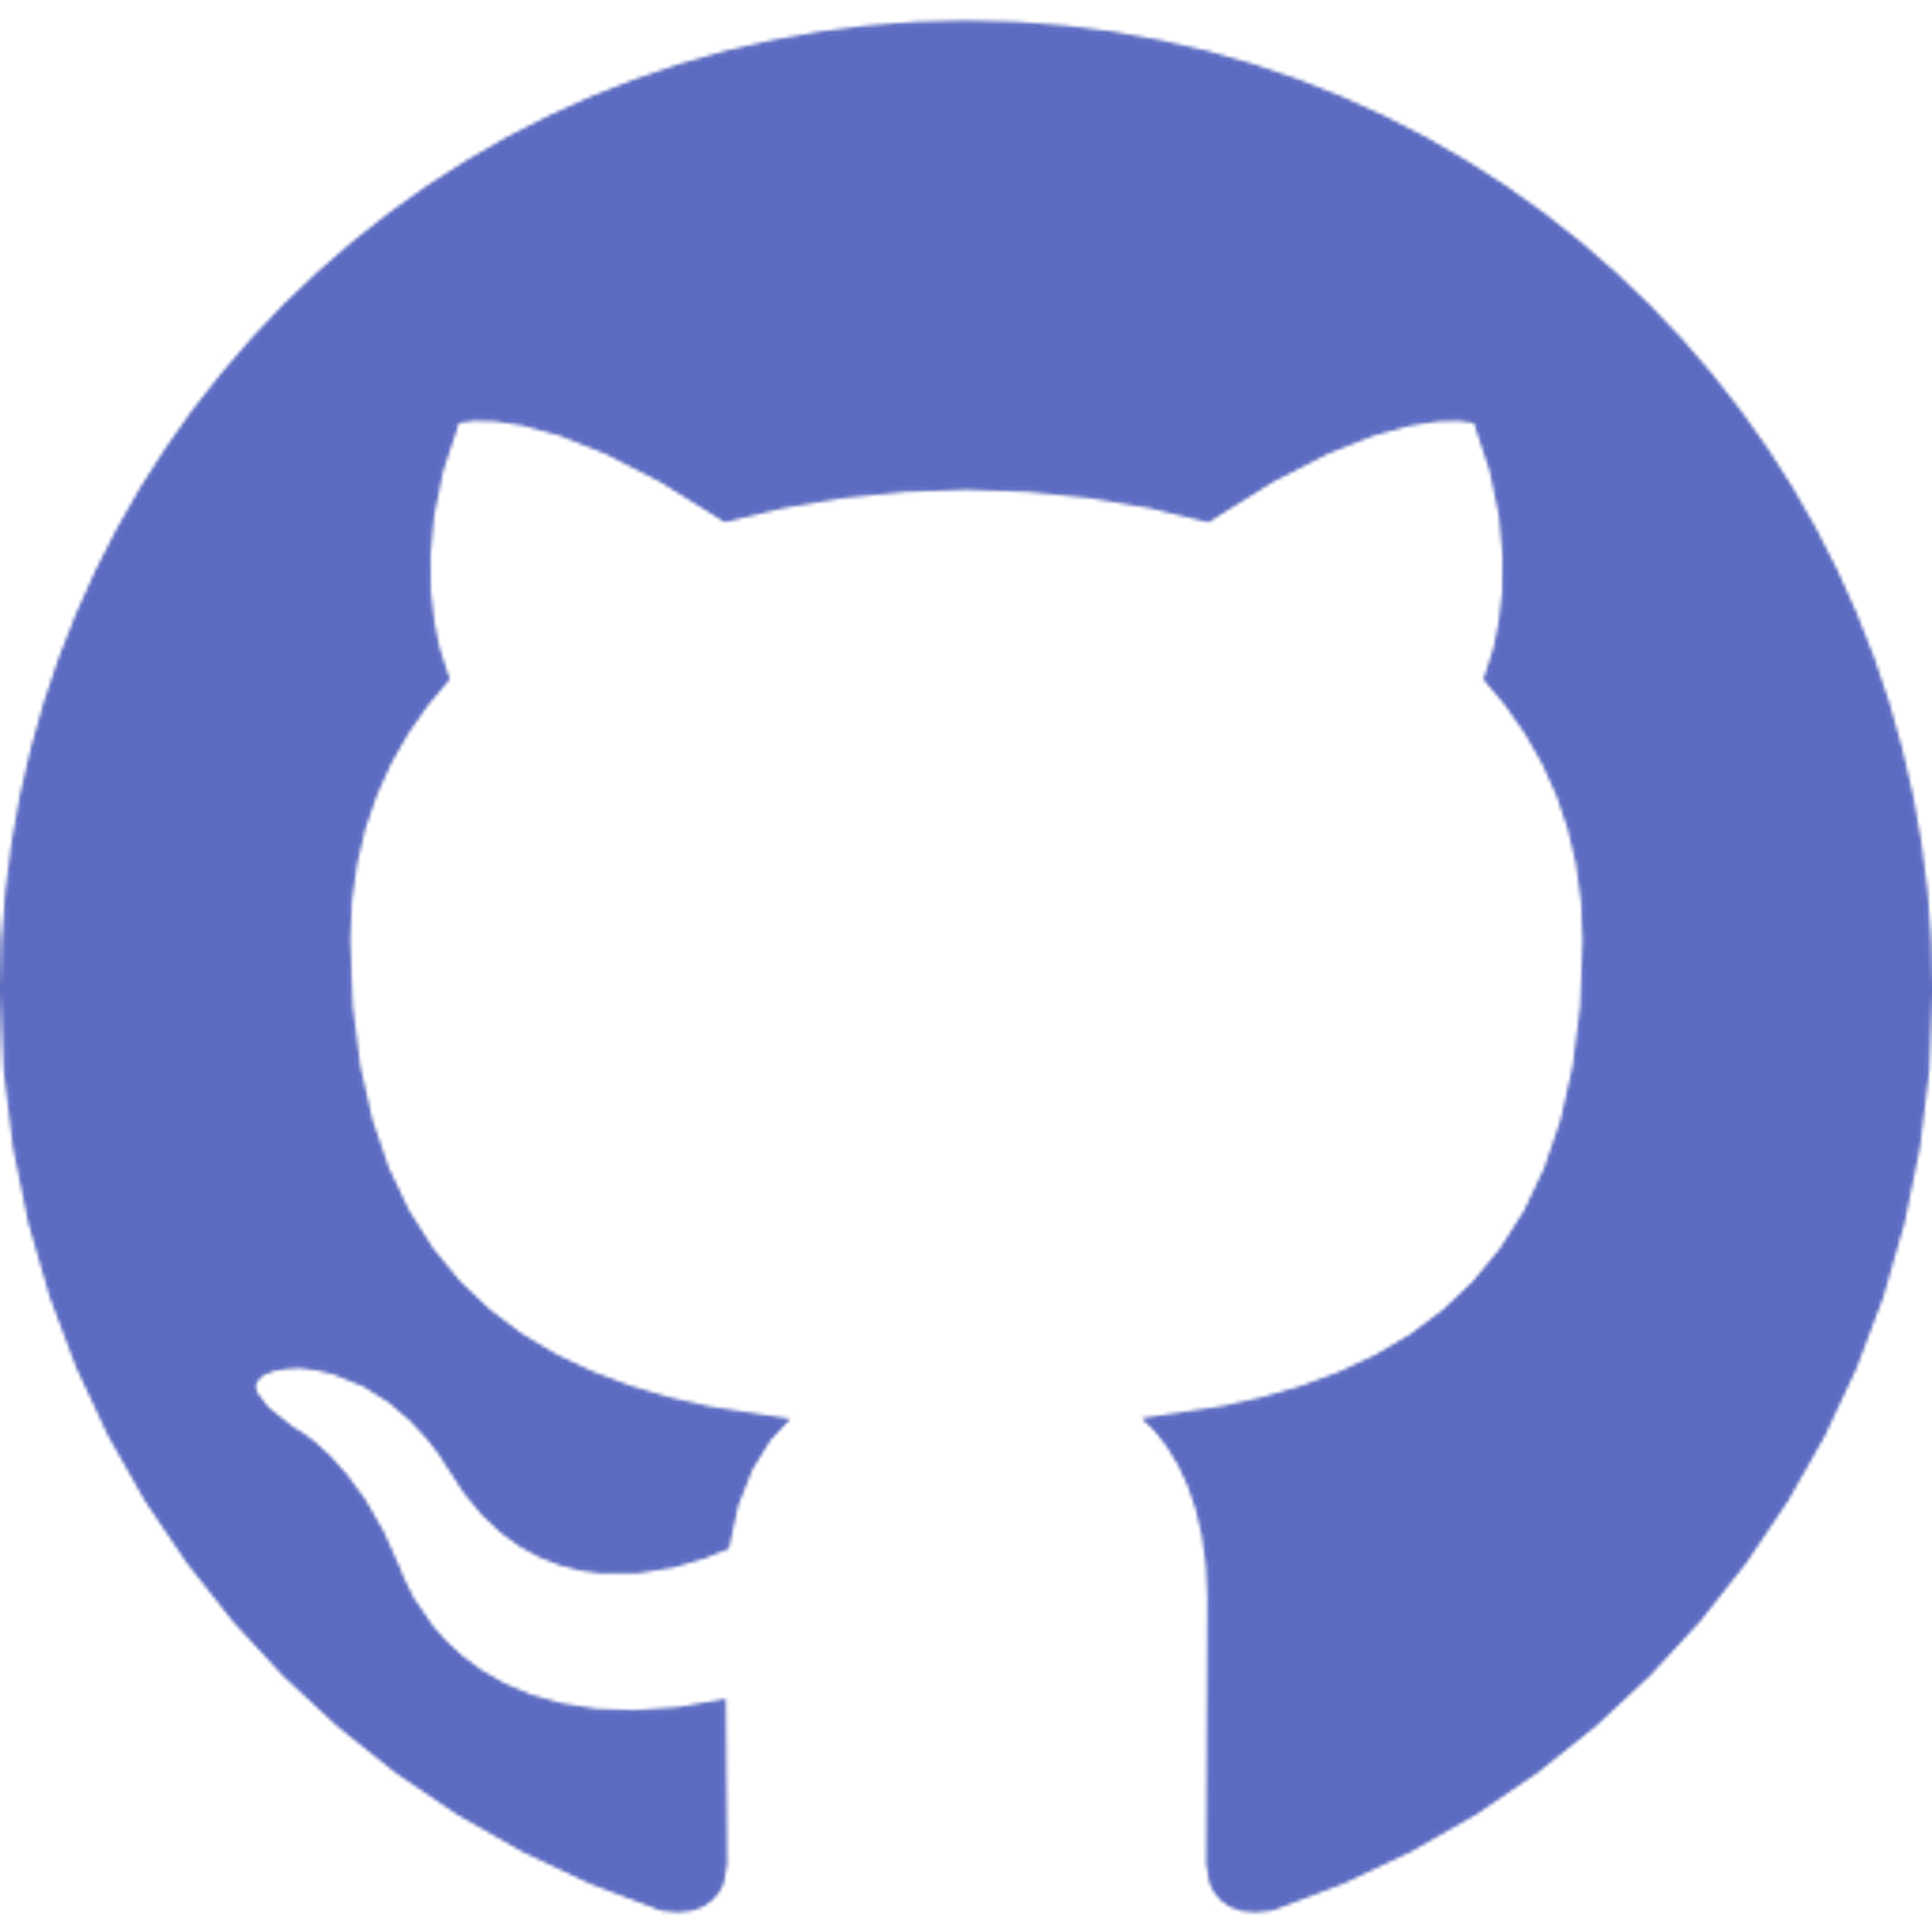 Learning Github 101: What is it and creating your account in github